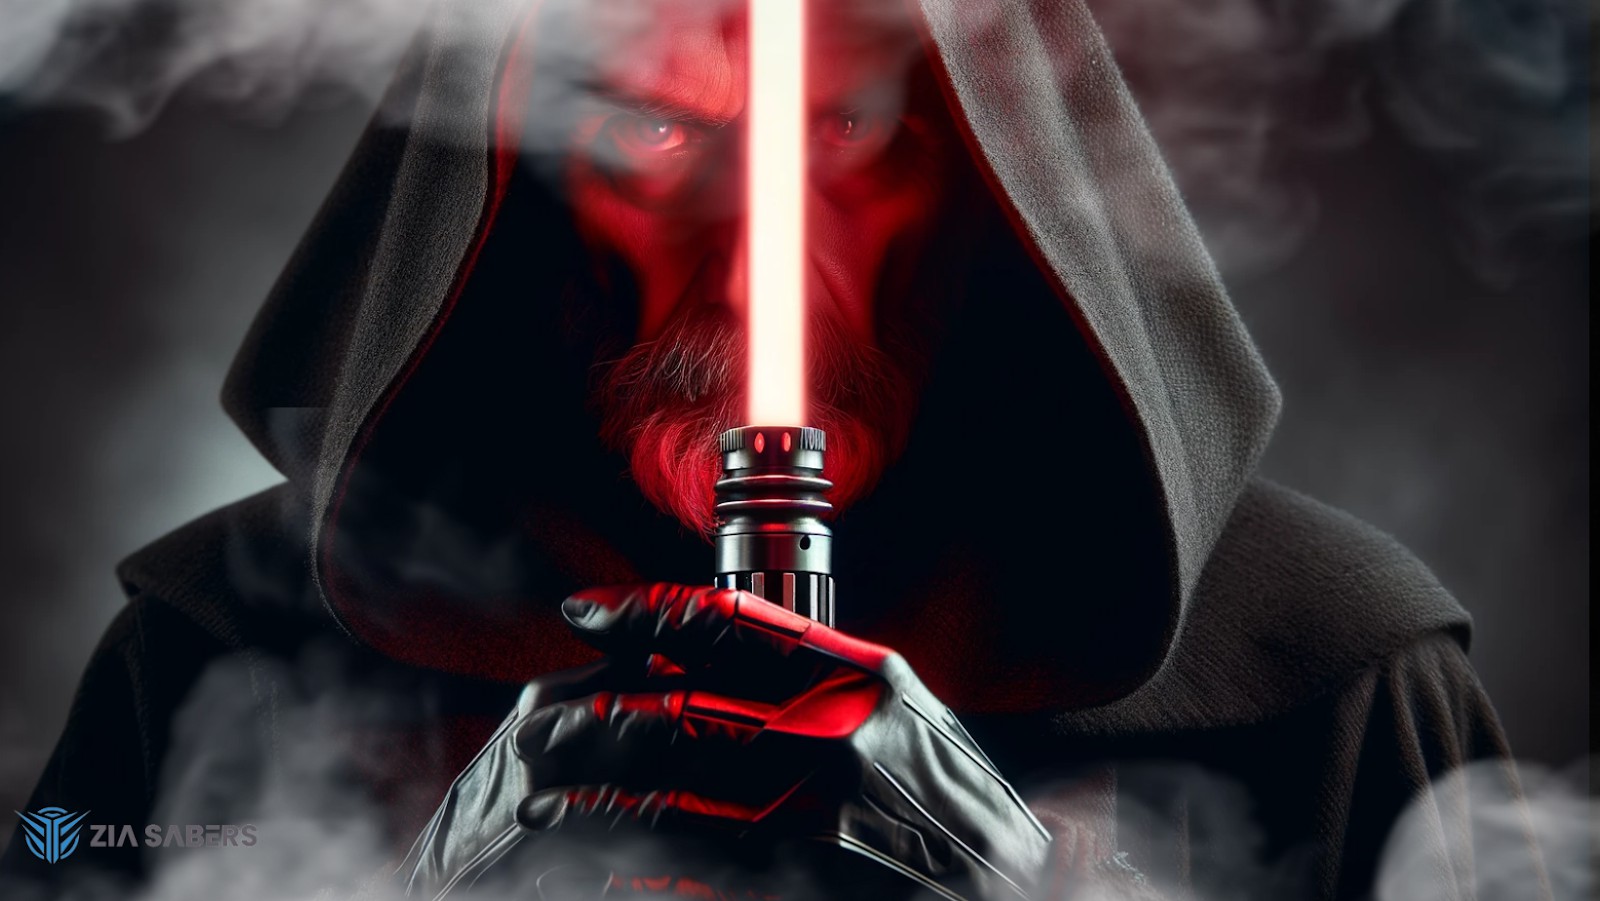 Who Has A Red Light Saber In Star Wars?